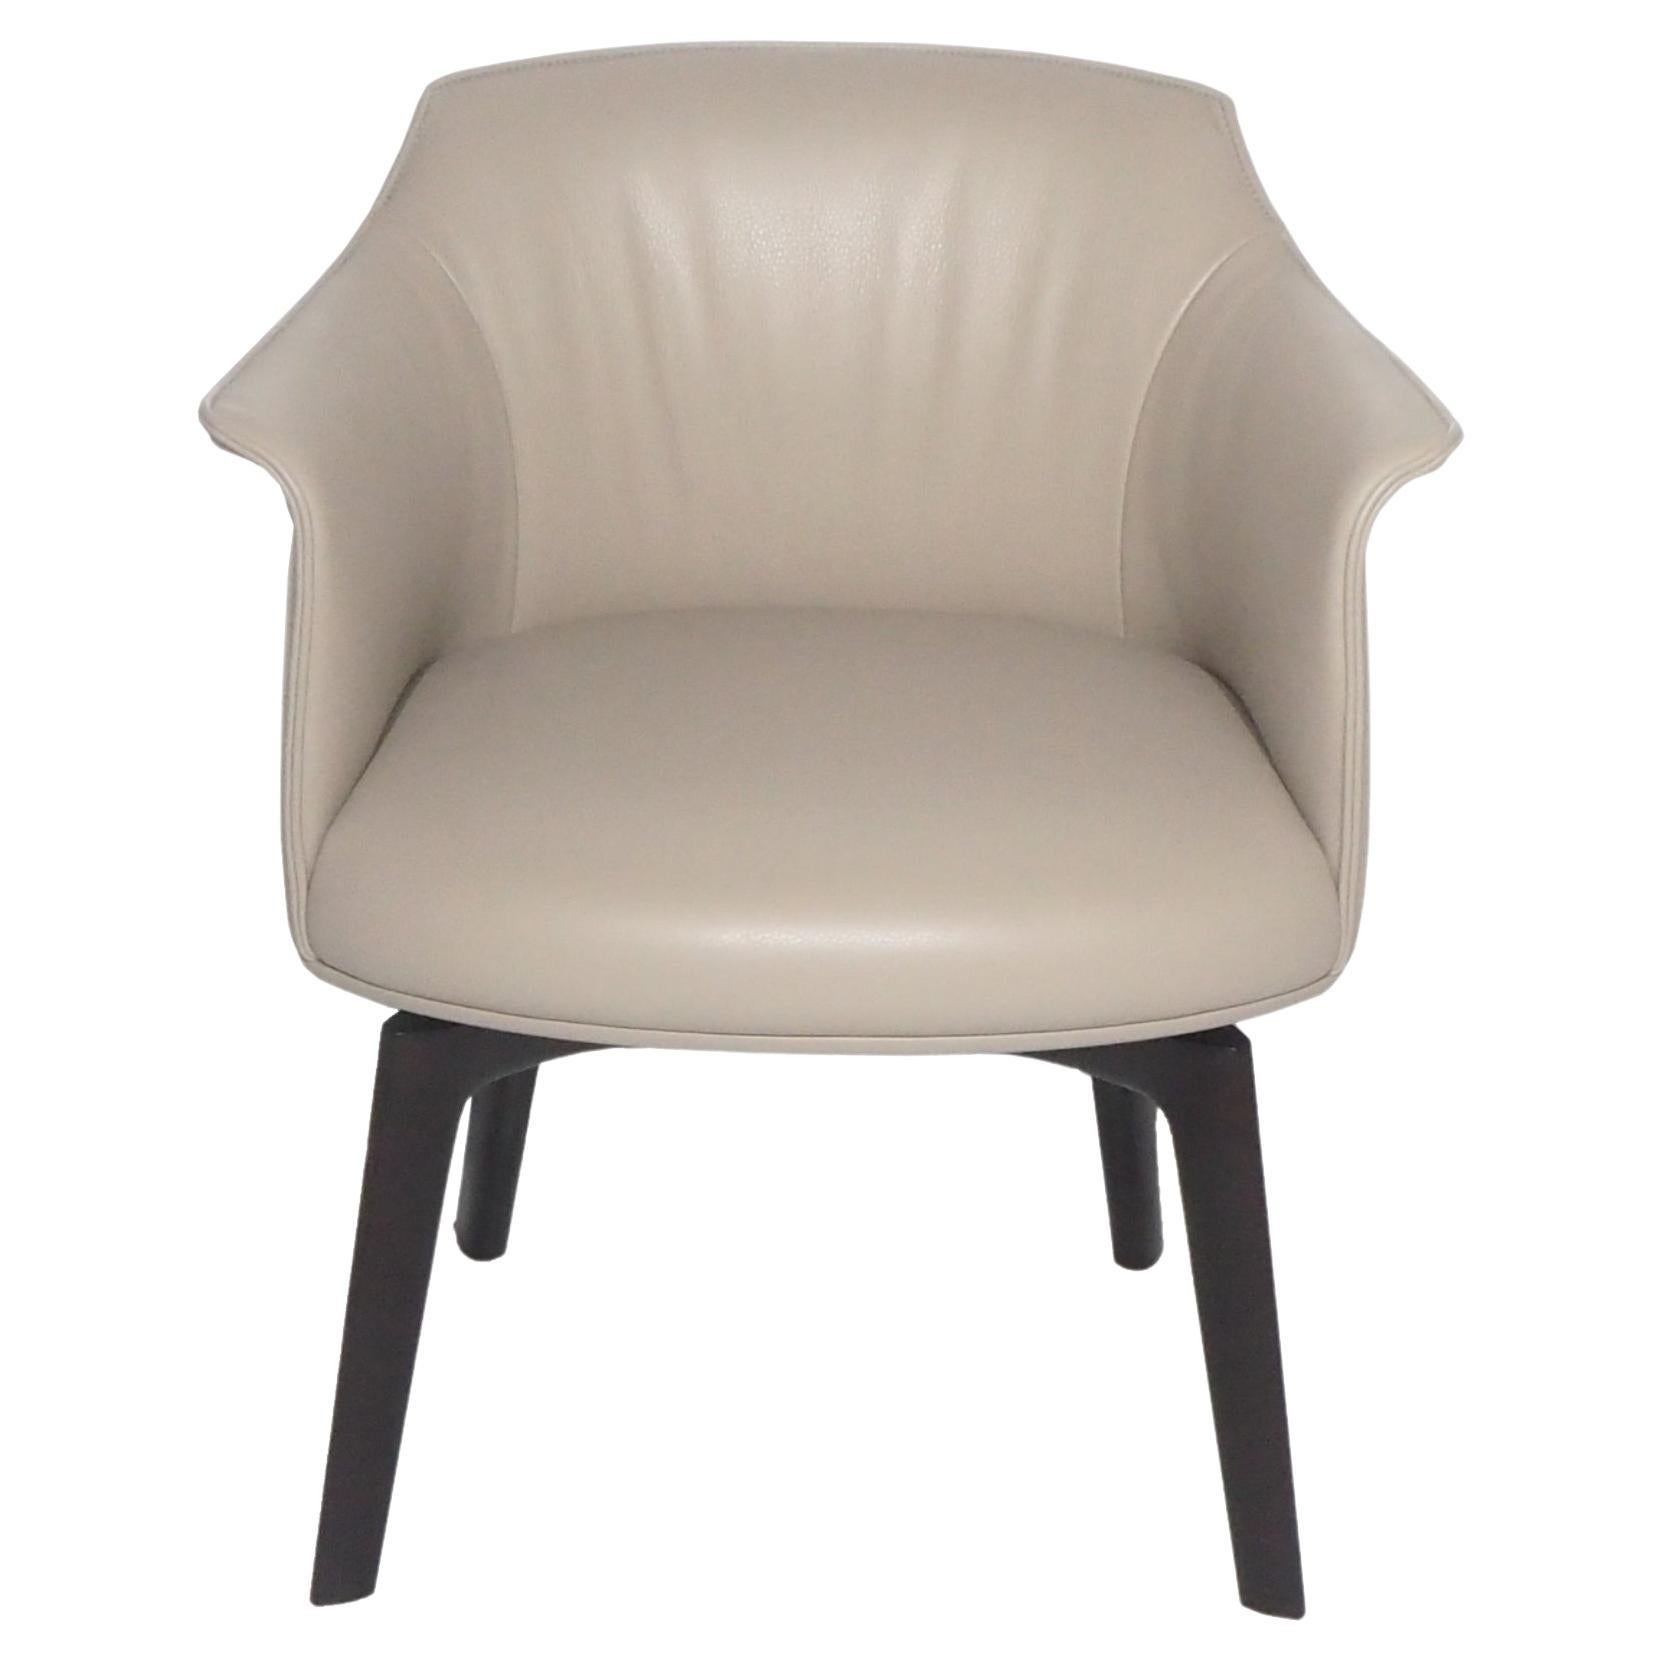 Archibald Swivel Dining Chair in Genuine Leather Nest Salgemma Beige  For Sale